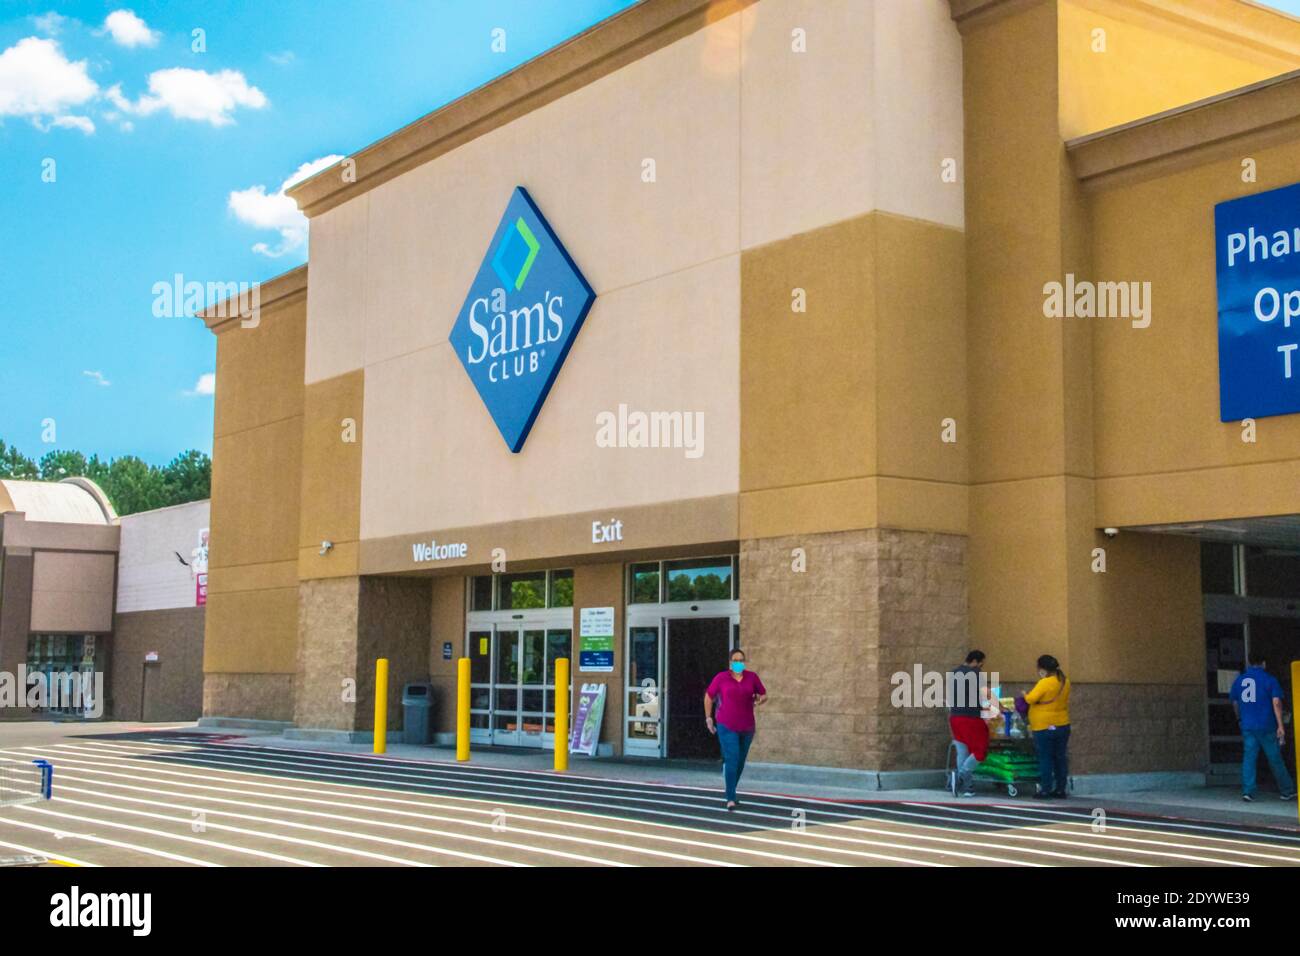 Gwinnett, County USA - 05 31 20: Sams Club building sign and  lady with a face mask on Stock Photo